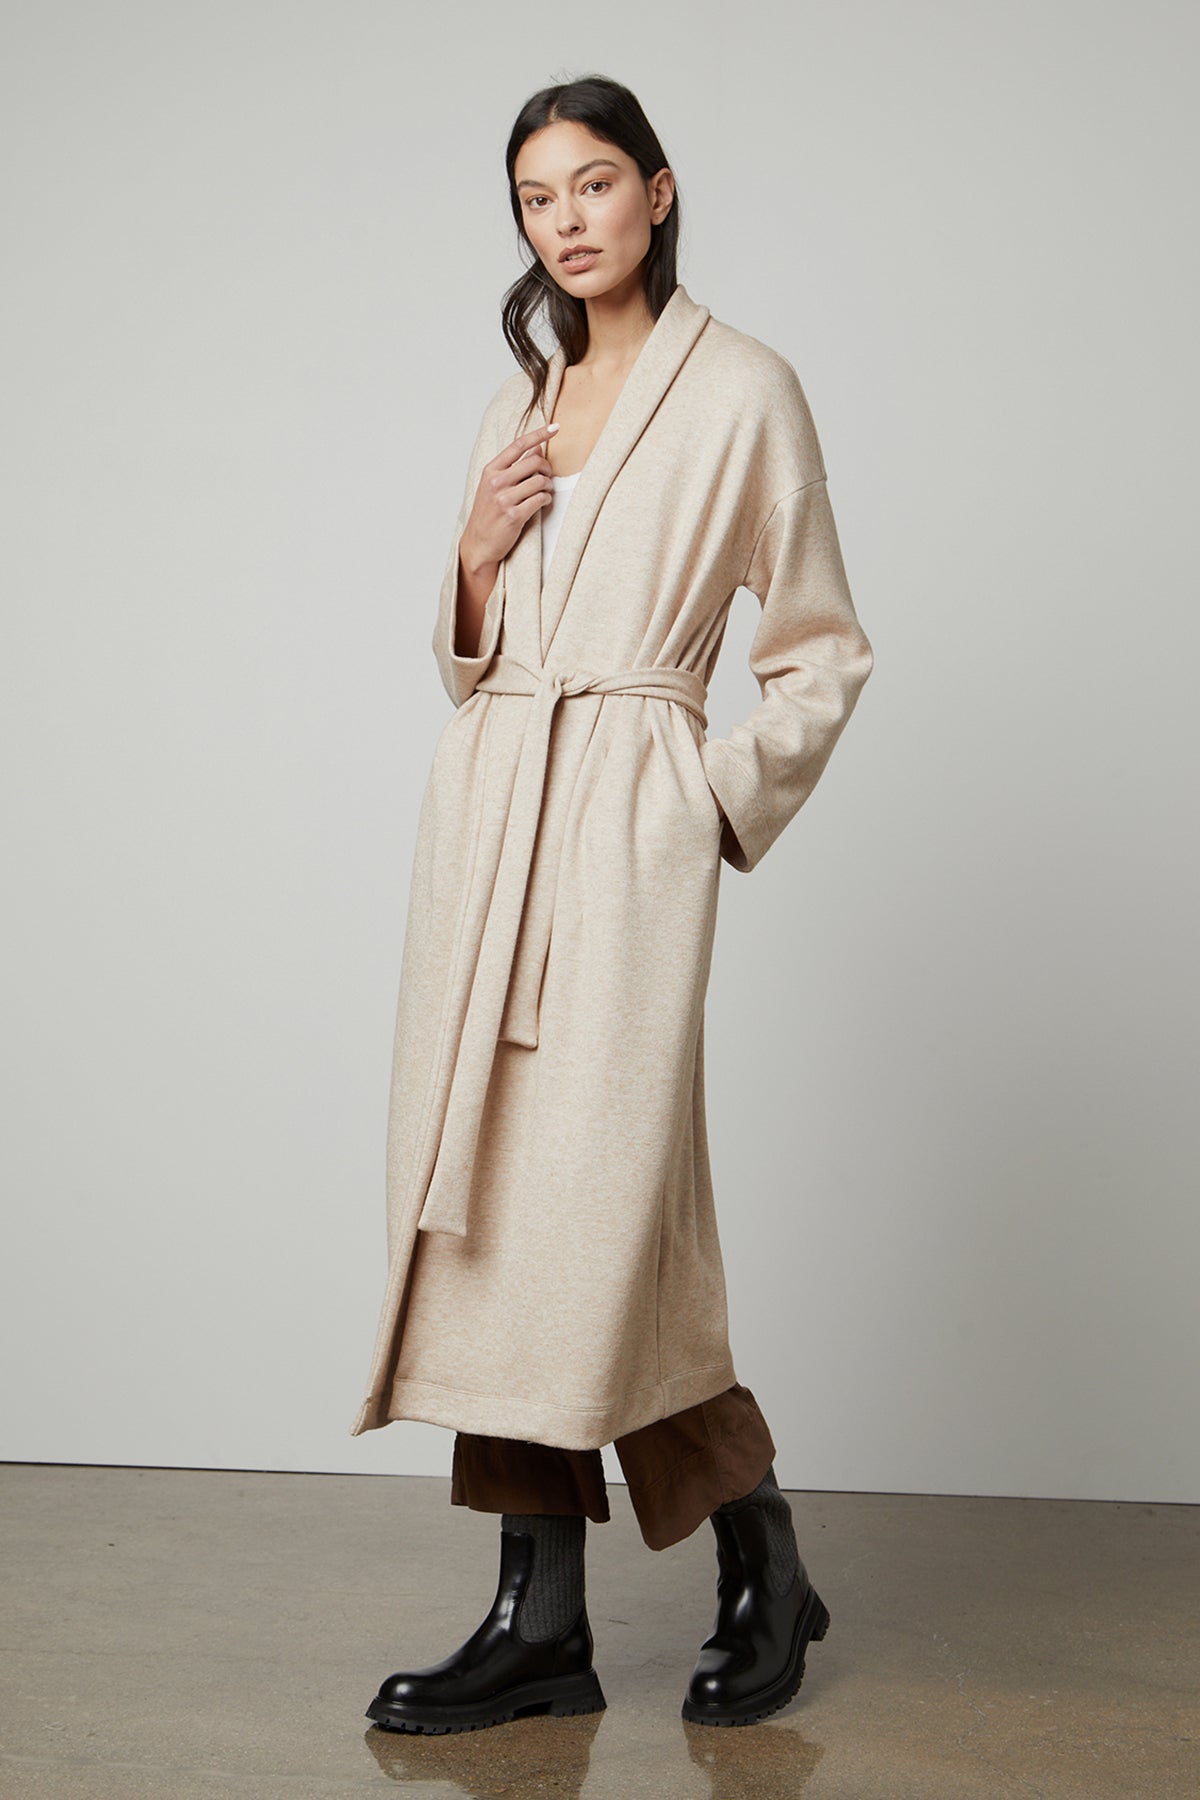   The model is wearing a cozy fabric beige Patricia Double Knit Duster Cardigan with a belt by Velvet by Graham & Spencer. 